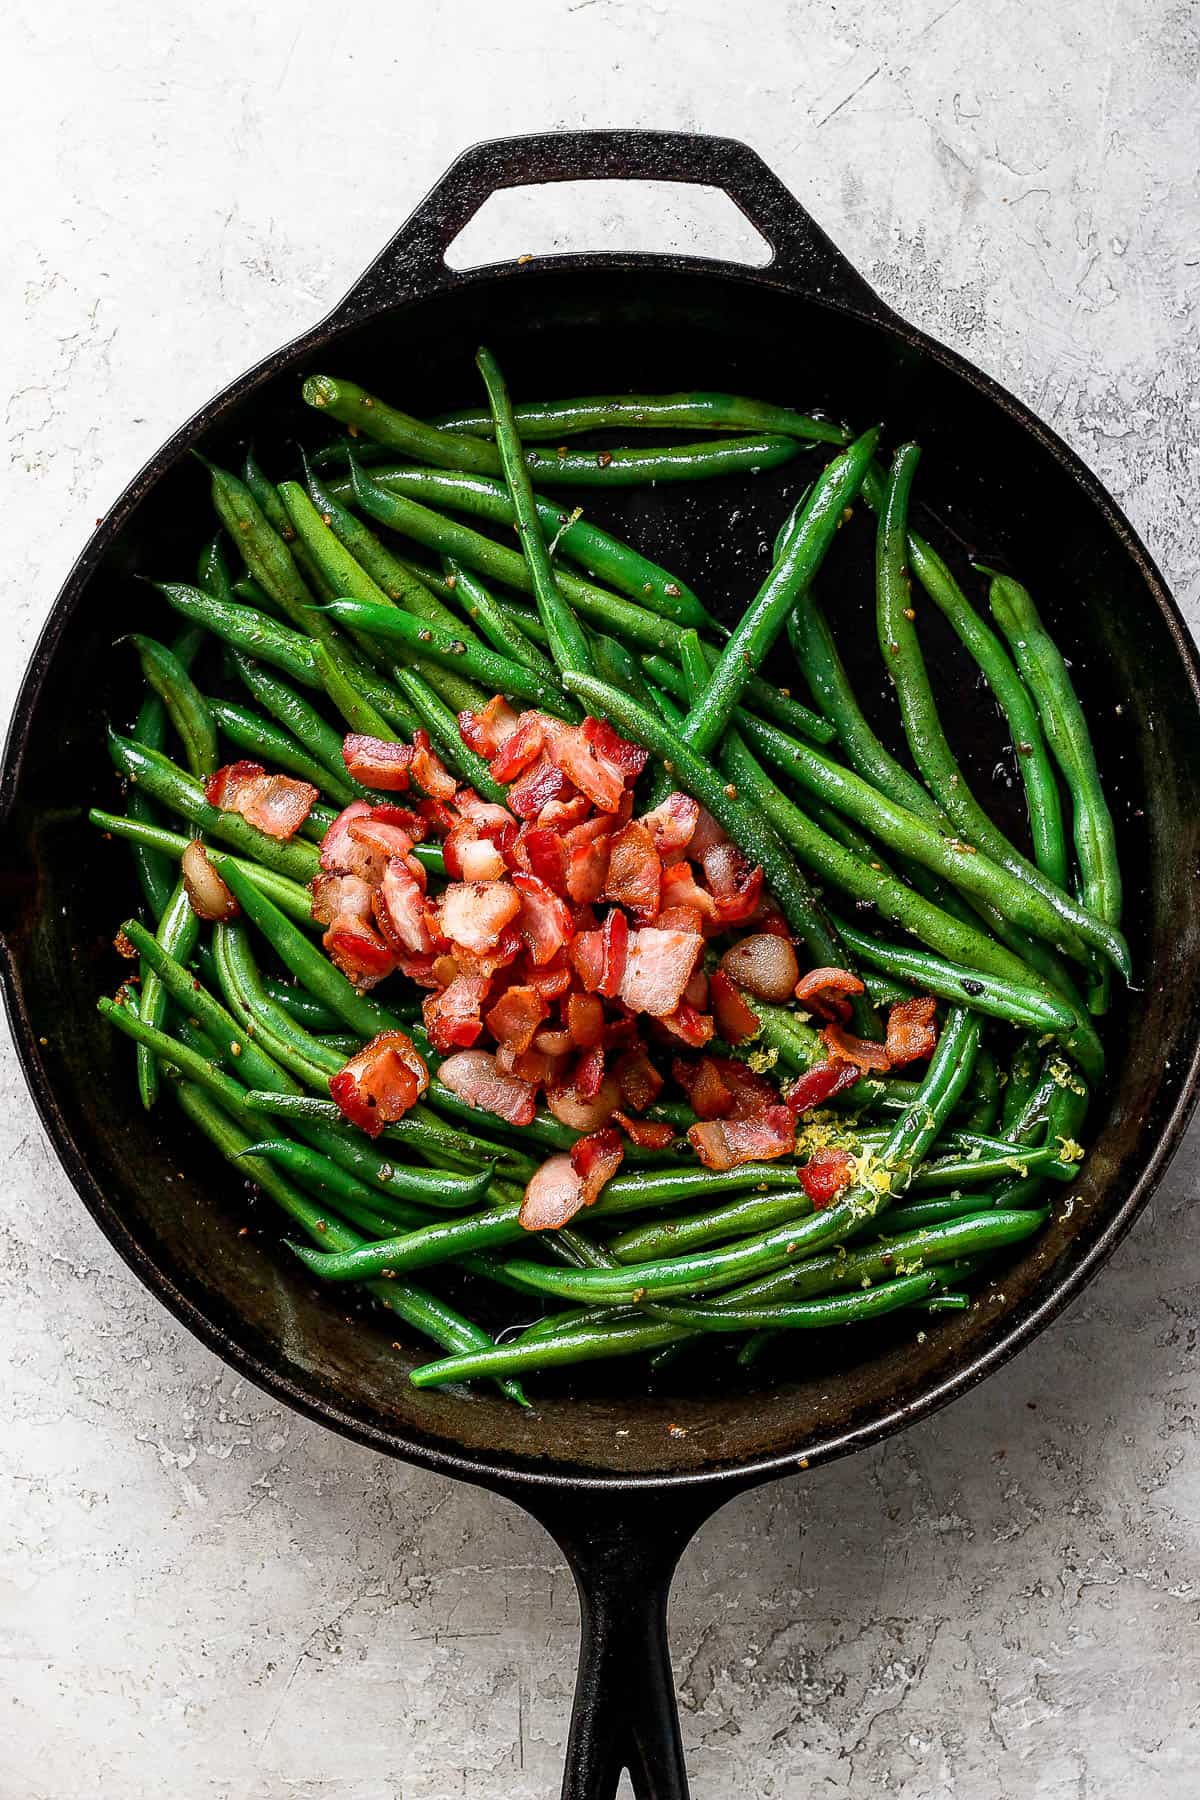 Cooked bacon on top of the green beans in the cast iron skillet.